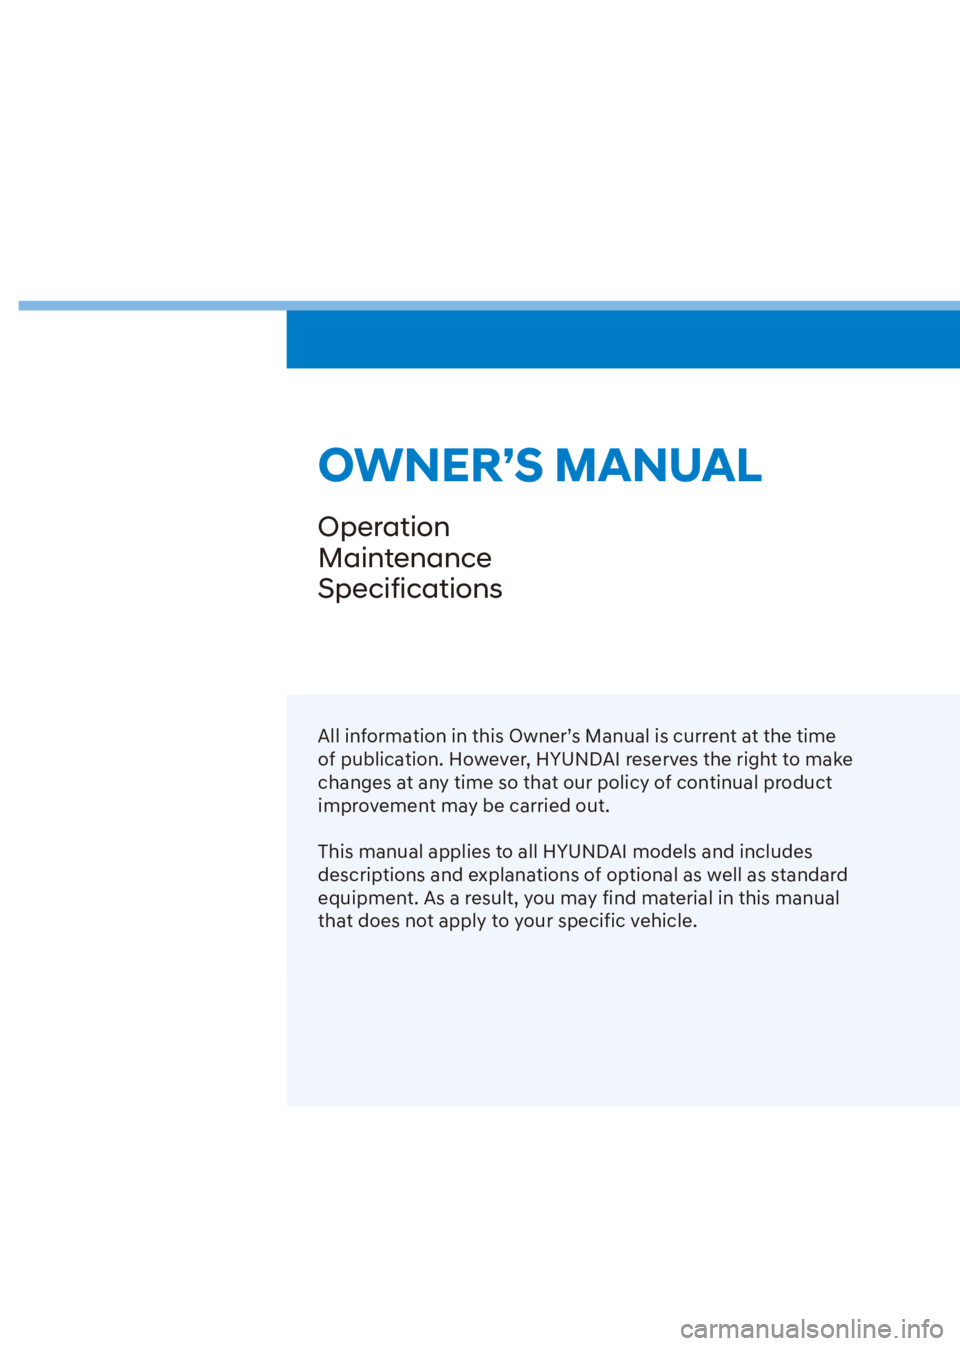 HYUNDAI VENUE 2023  Owners Manual OWNER’S MANUAL
Operation
Maintenance
Specifications
All information in this Owner’s Manual is current at the time 
of publication. However, HYUNDAI reserves the right to make 
changes at any time 